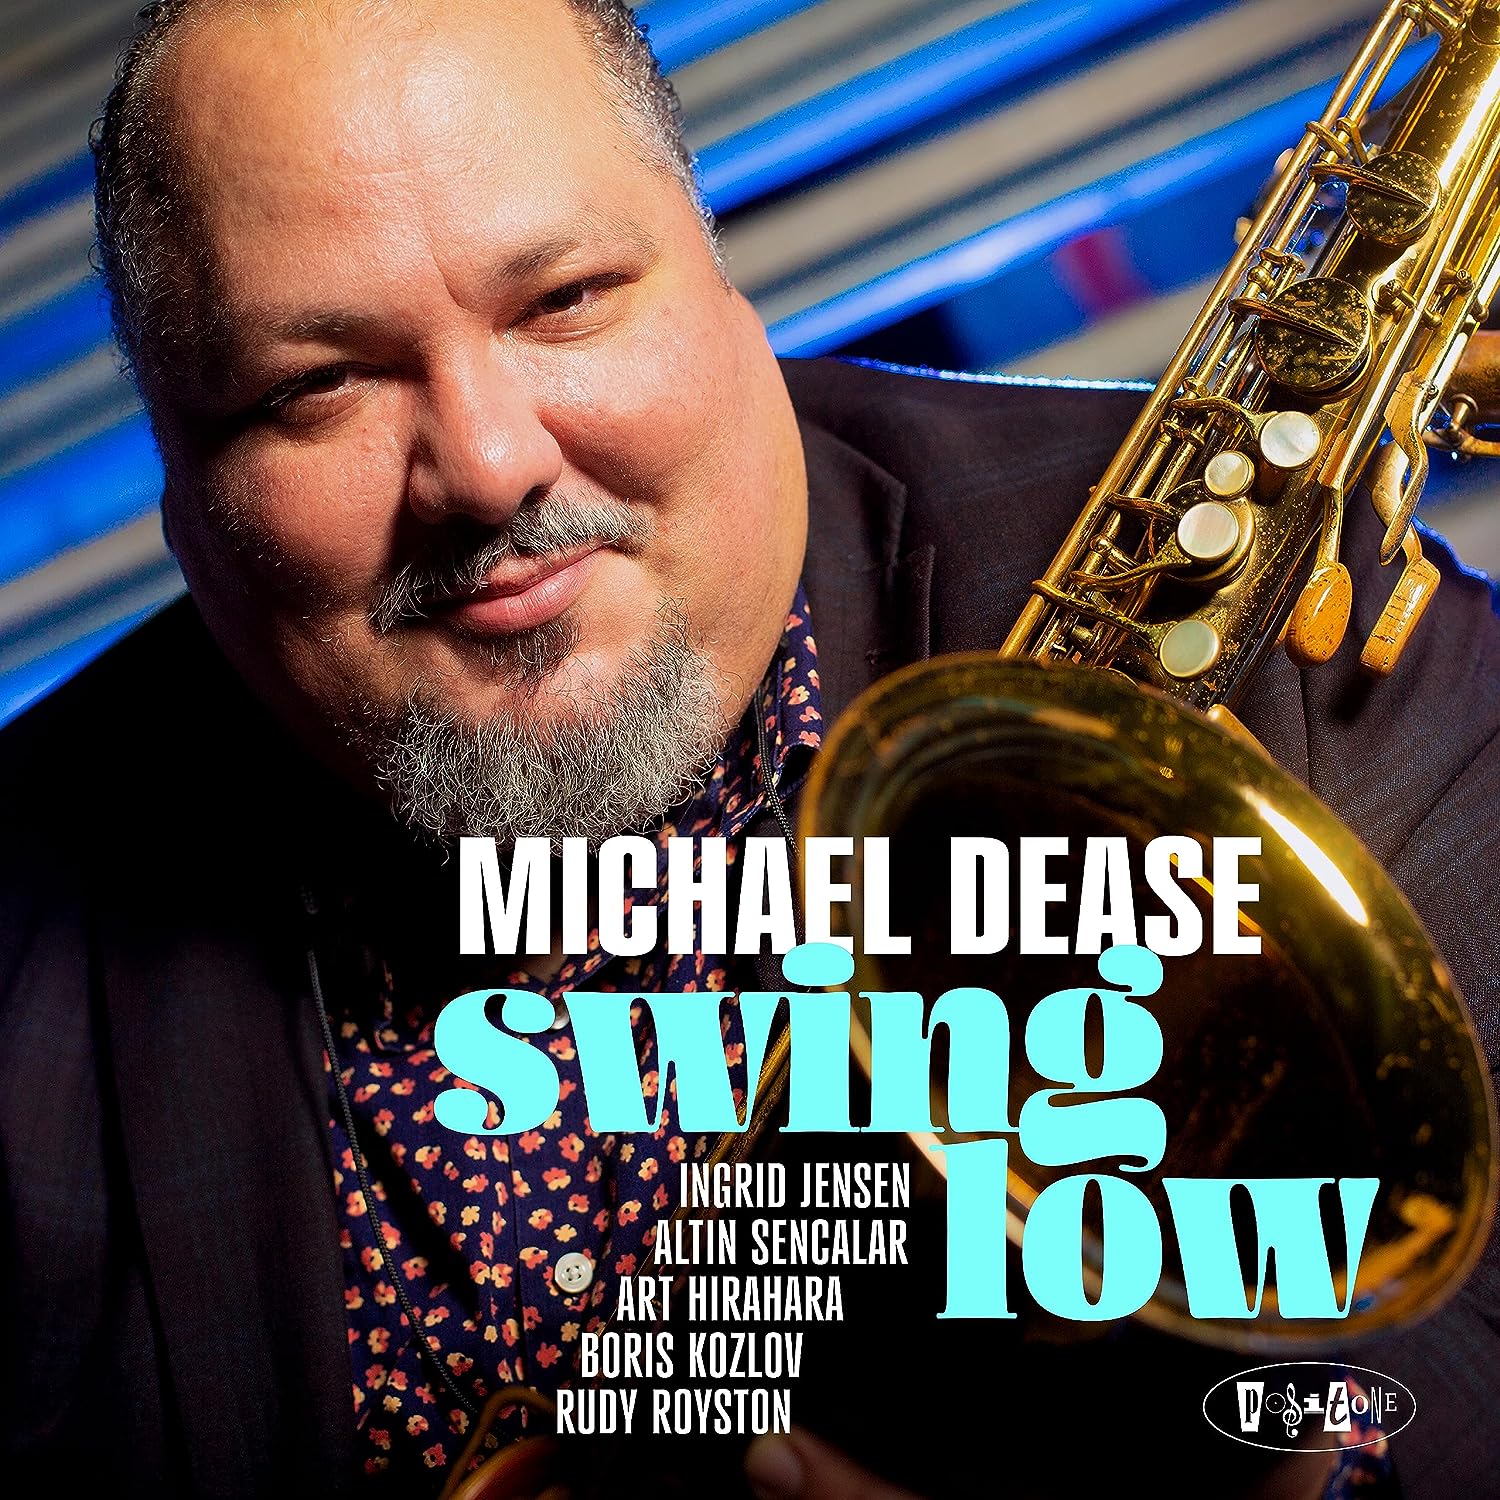 MICHAEL DEASE - Swing Low cover 